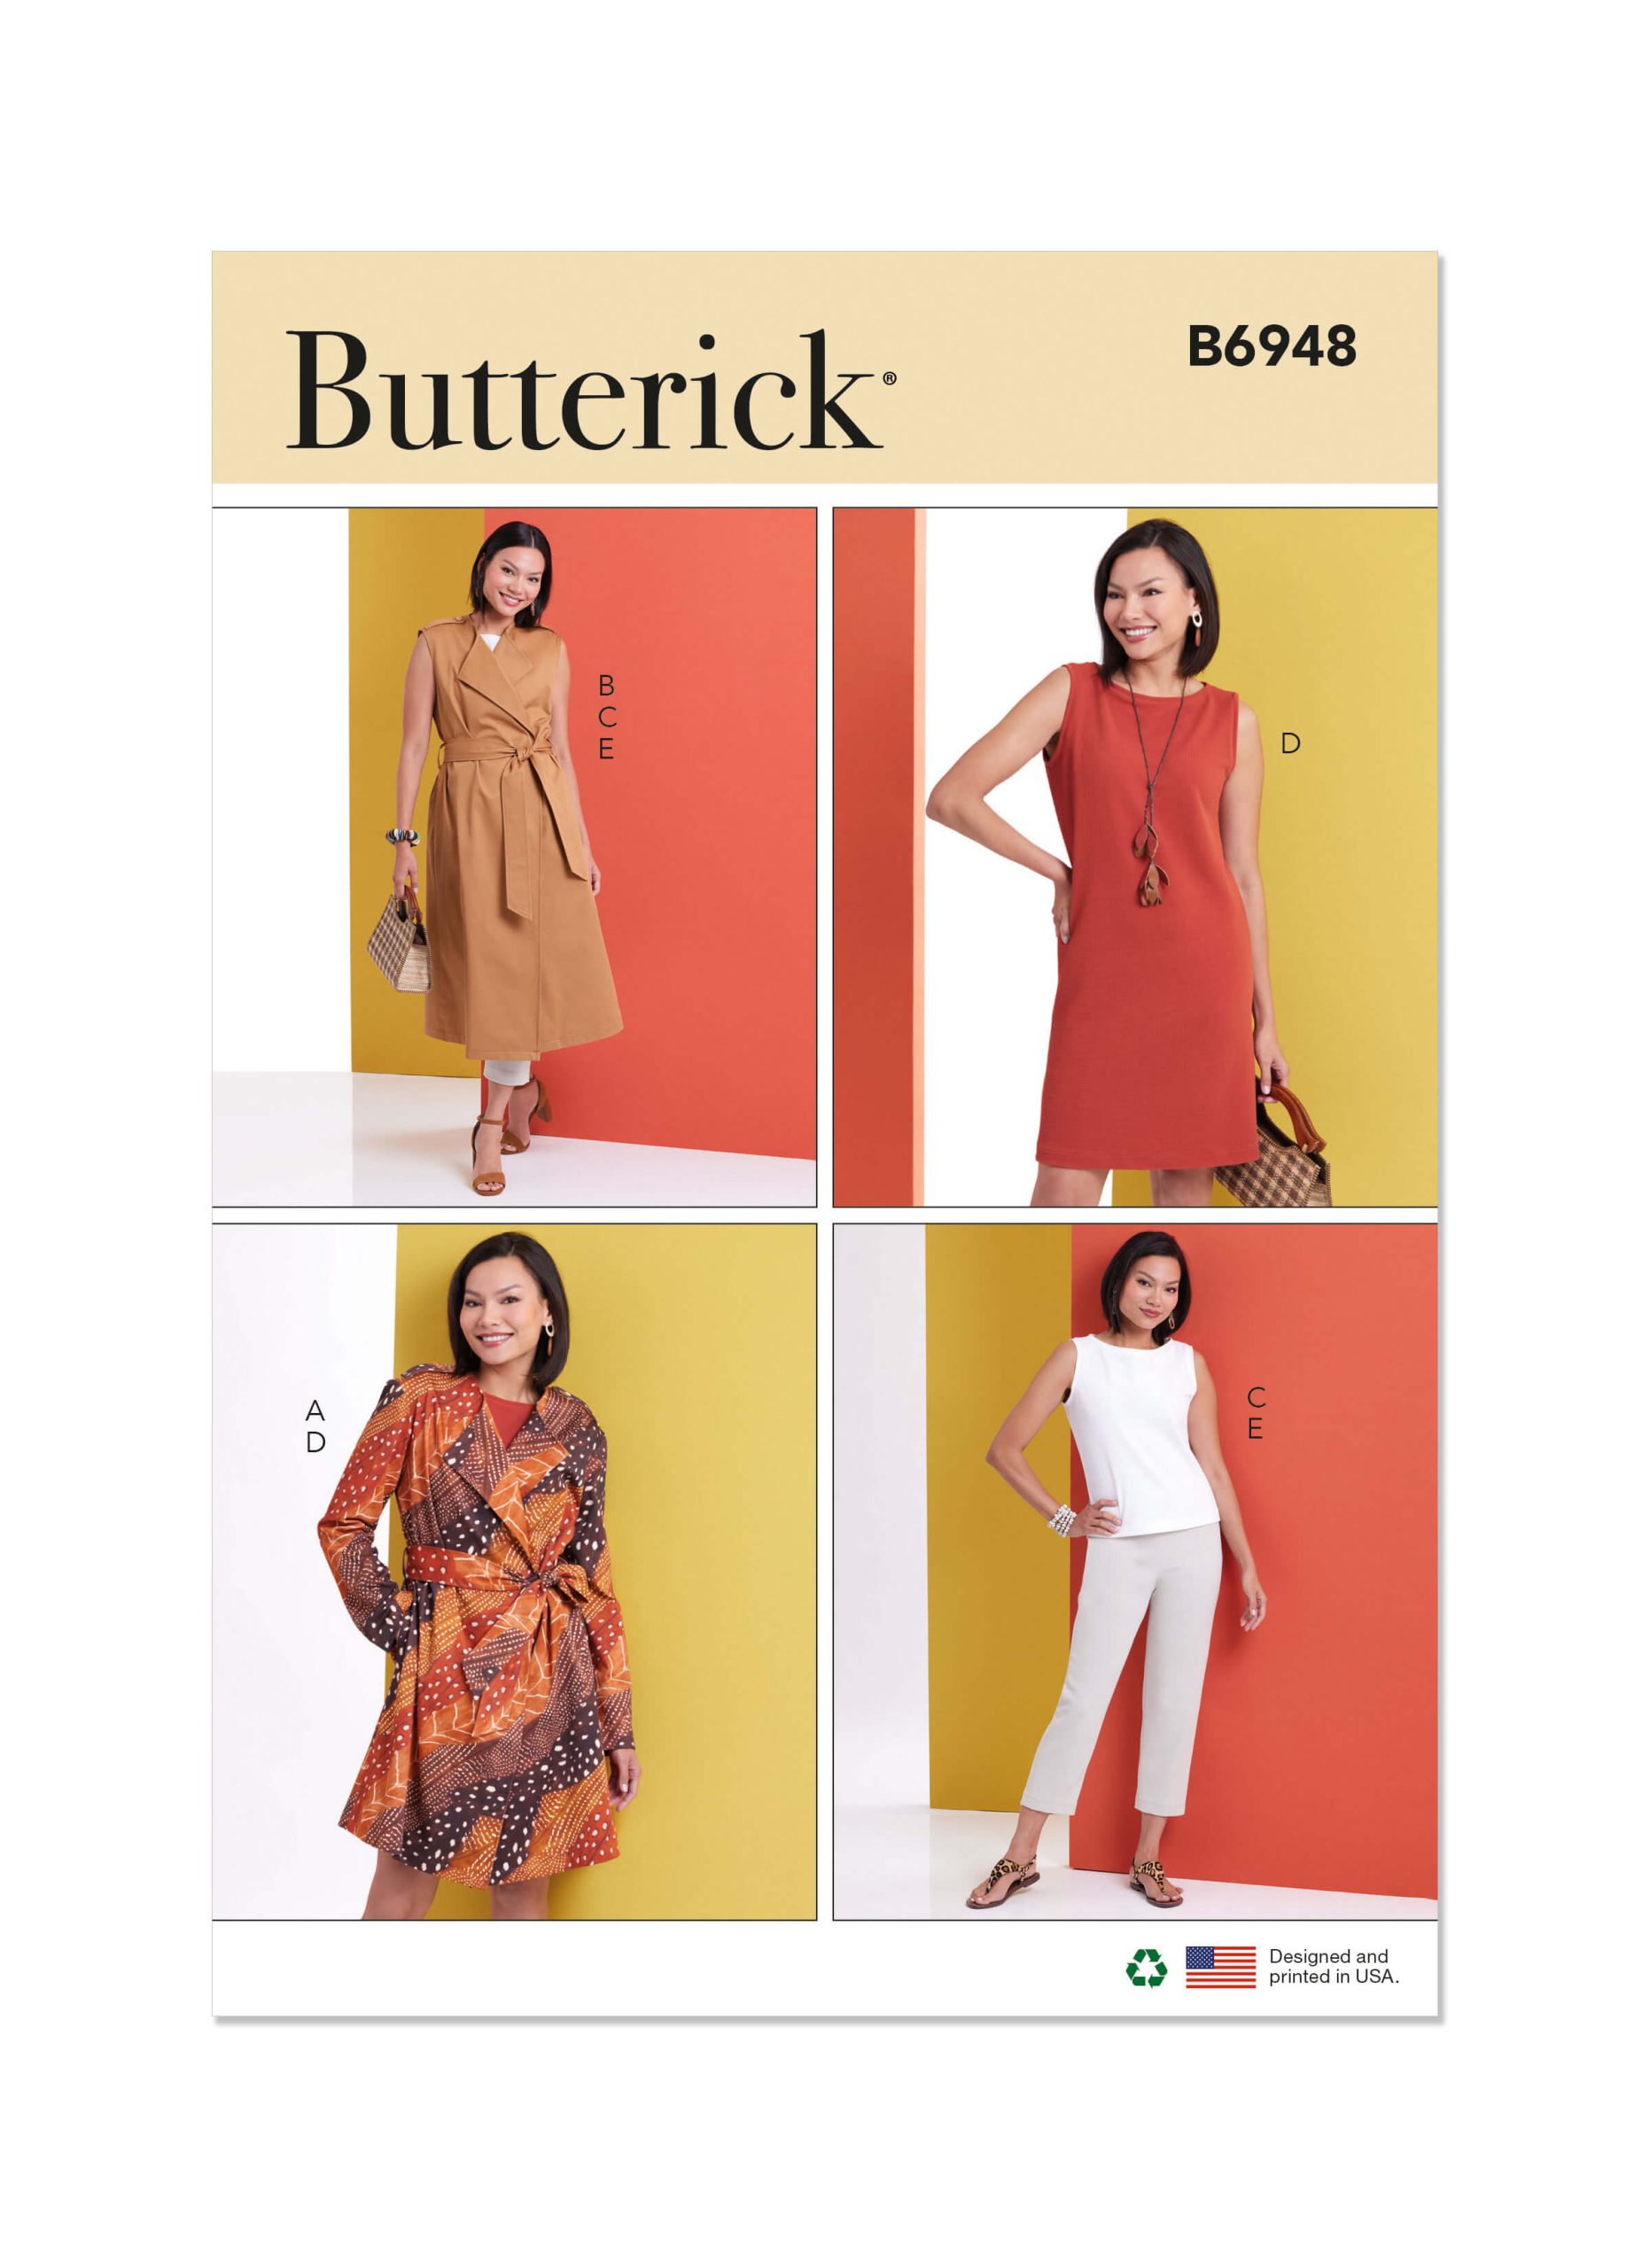 Butterick Sewing Pattern B6948 Misses' Jacket and Waistcoat with Belt, Top, Dress and Trousers